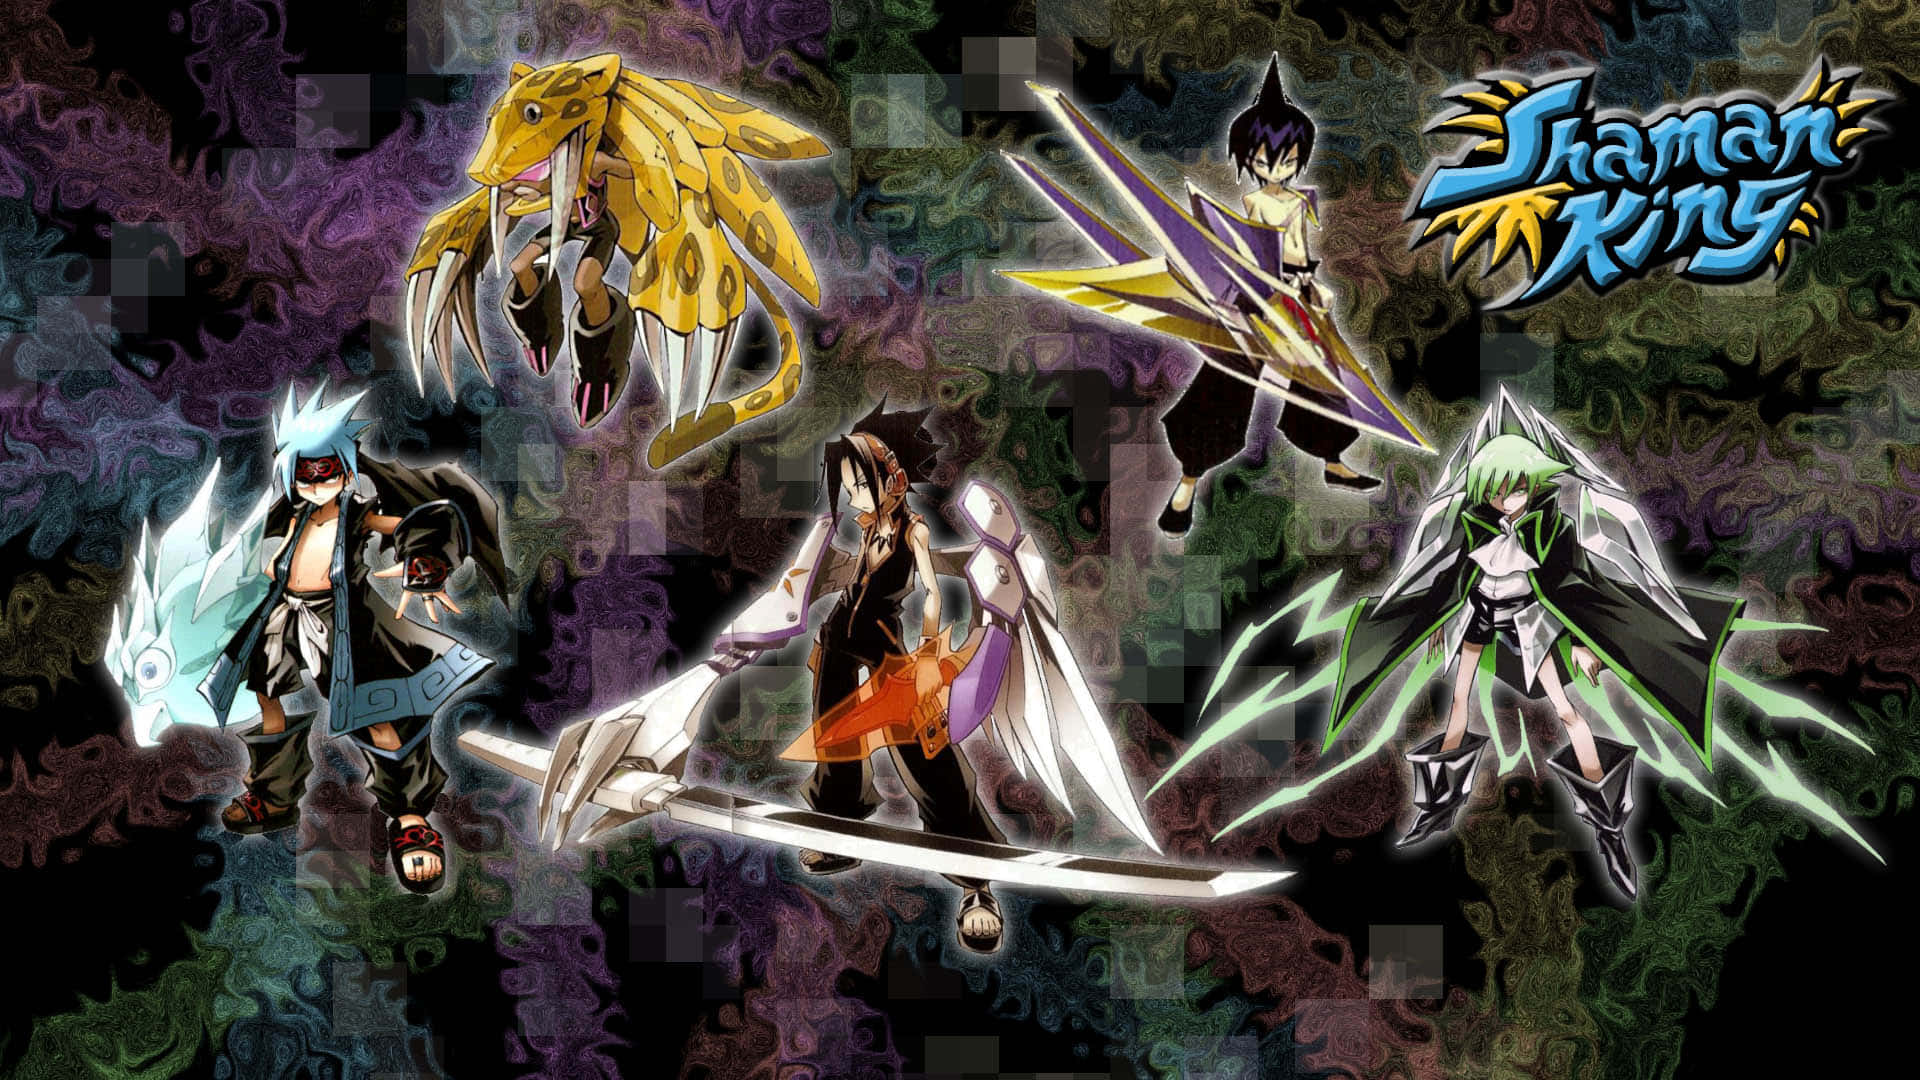 Get ready to enter the world of Shaman King and discover a new adventure!